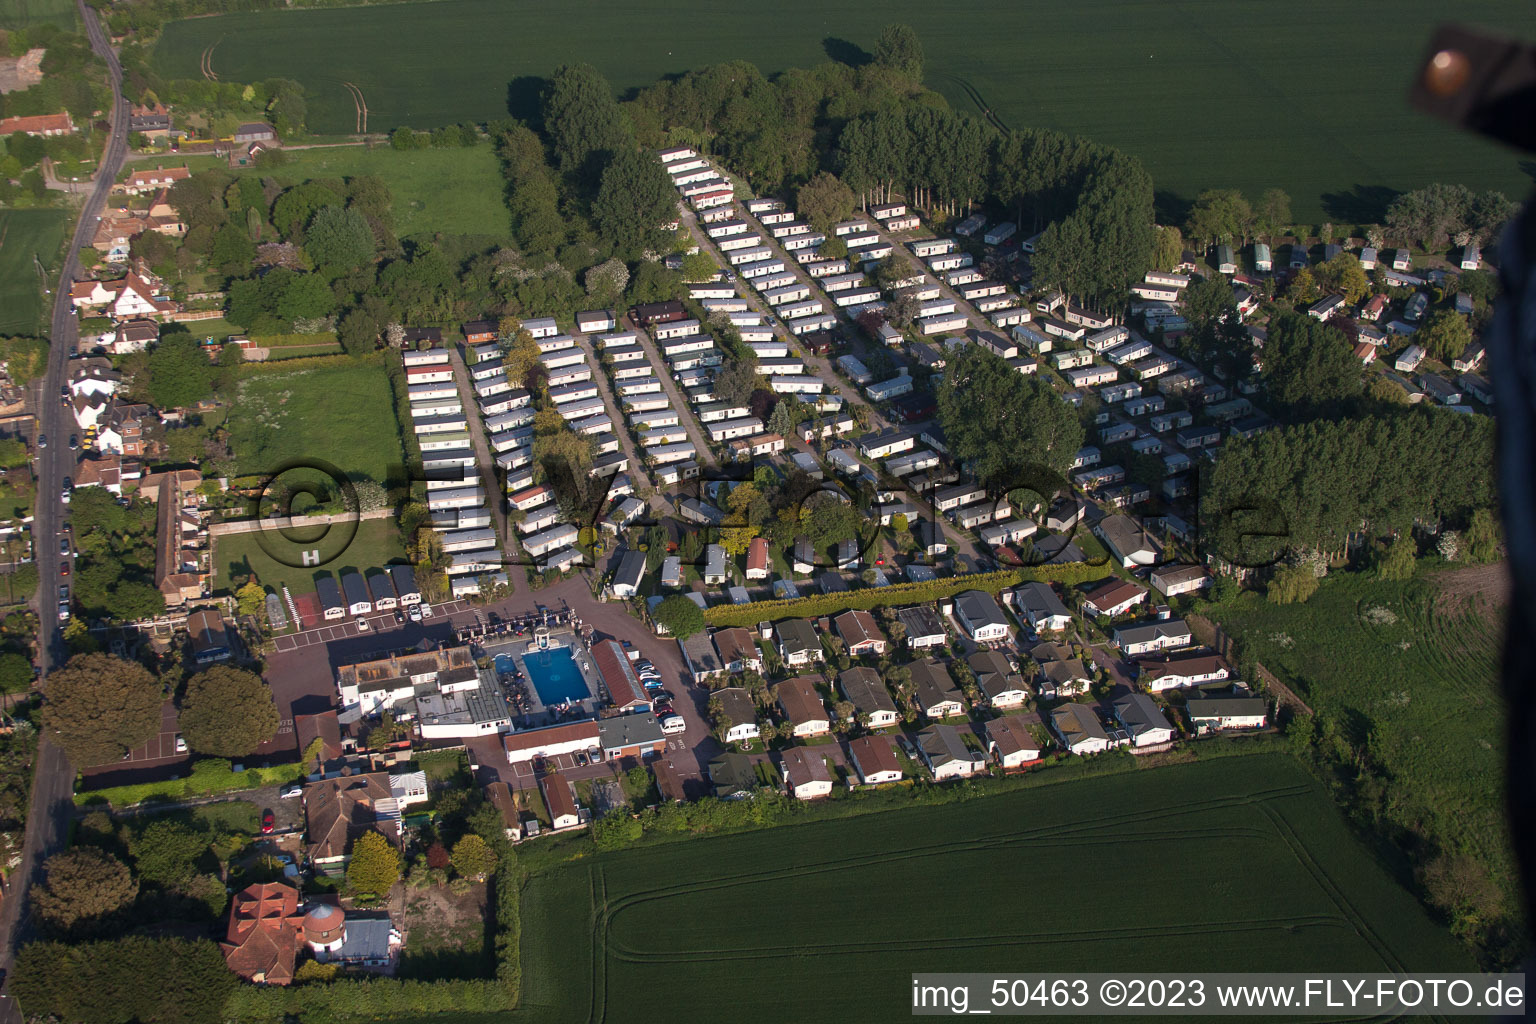 Monkton in the state England, Great Britain from above